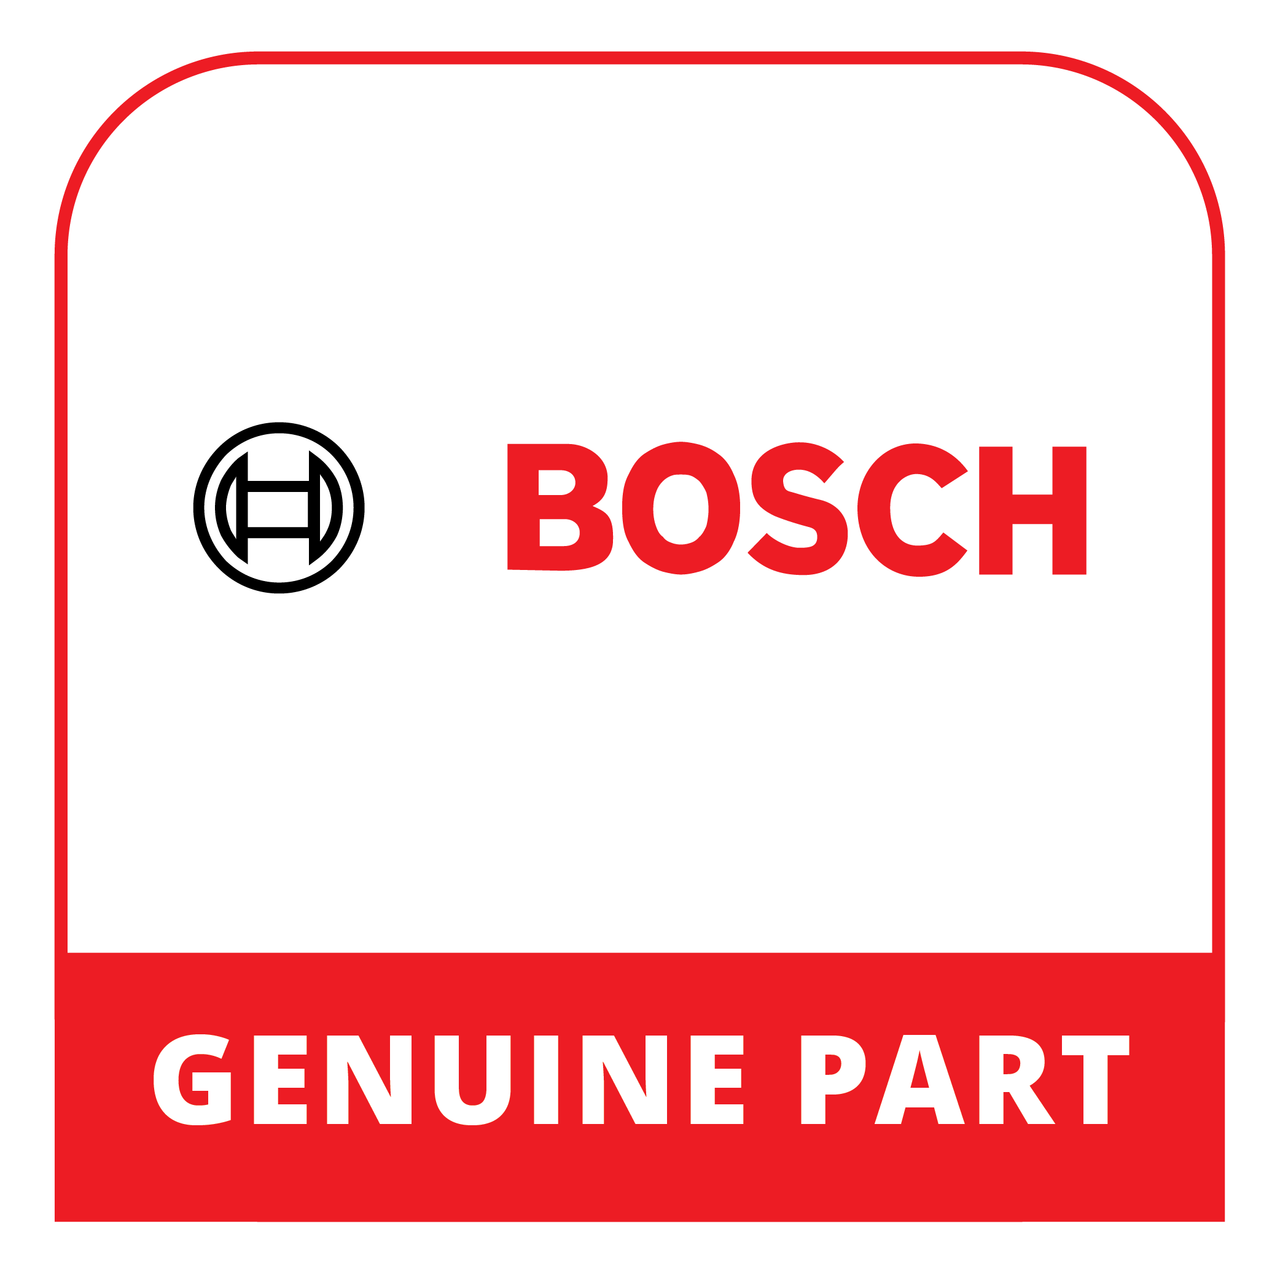 Bosch (Thermador) 11031141 - Display Module Programmed - Genuine Bosch (Thermador) Part